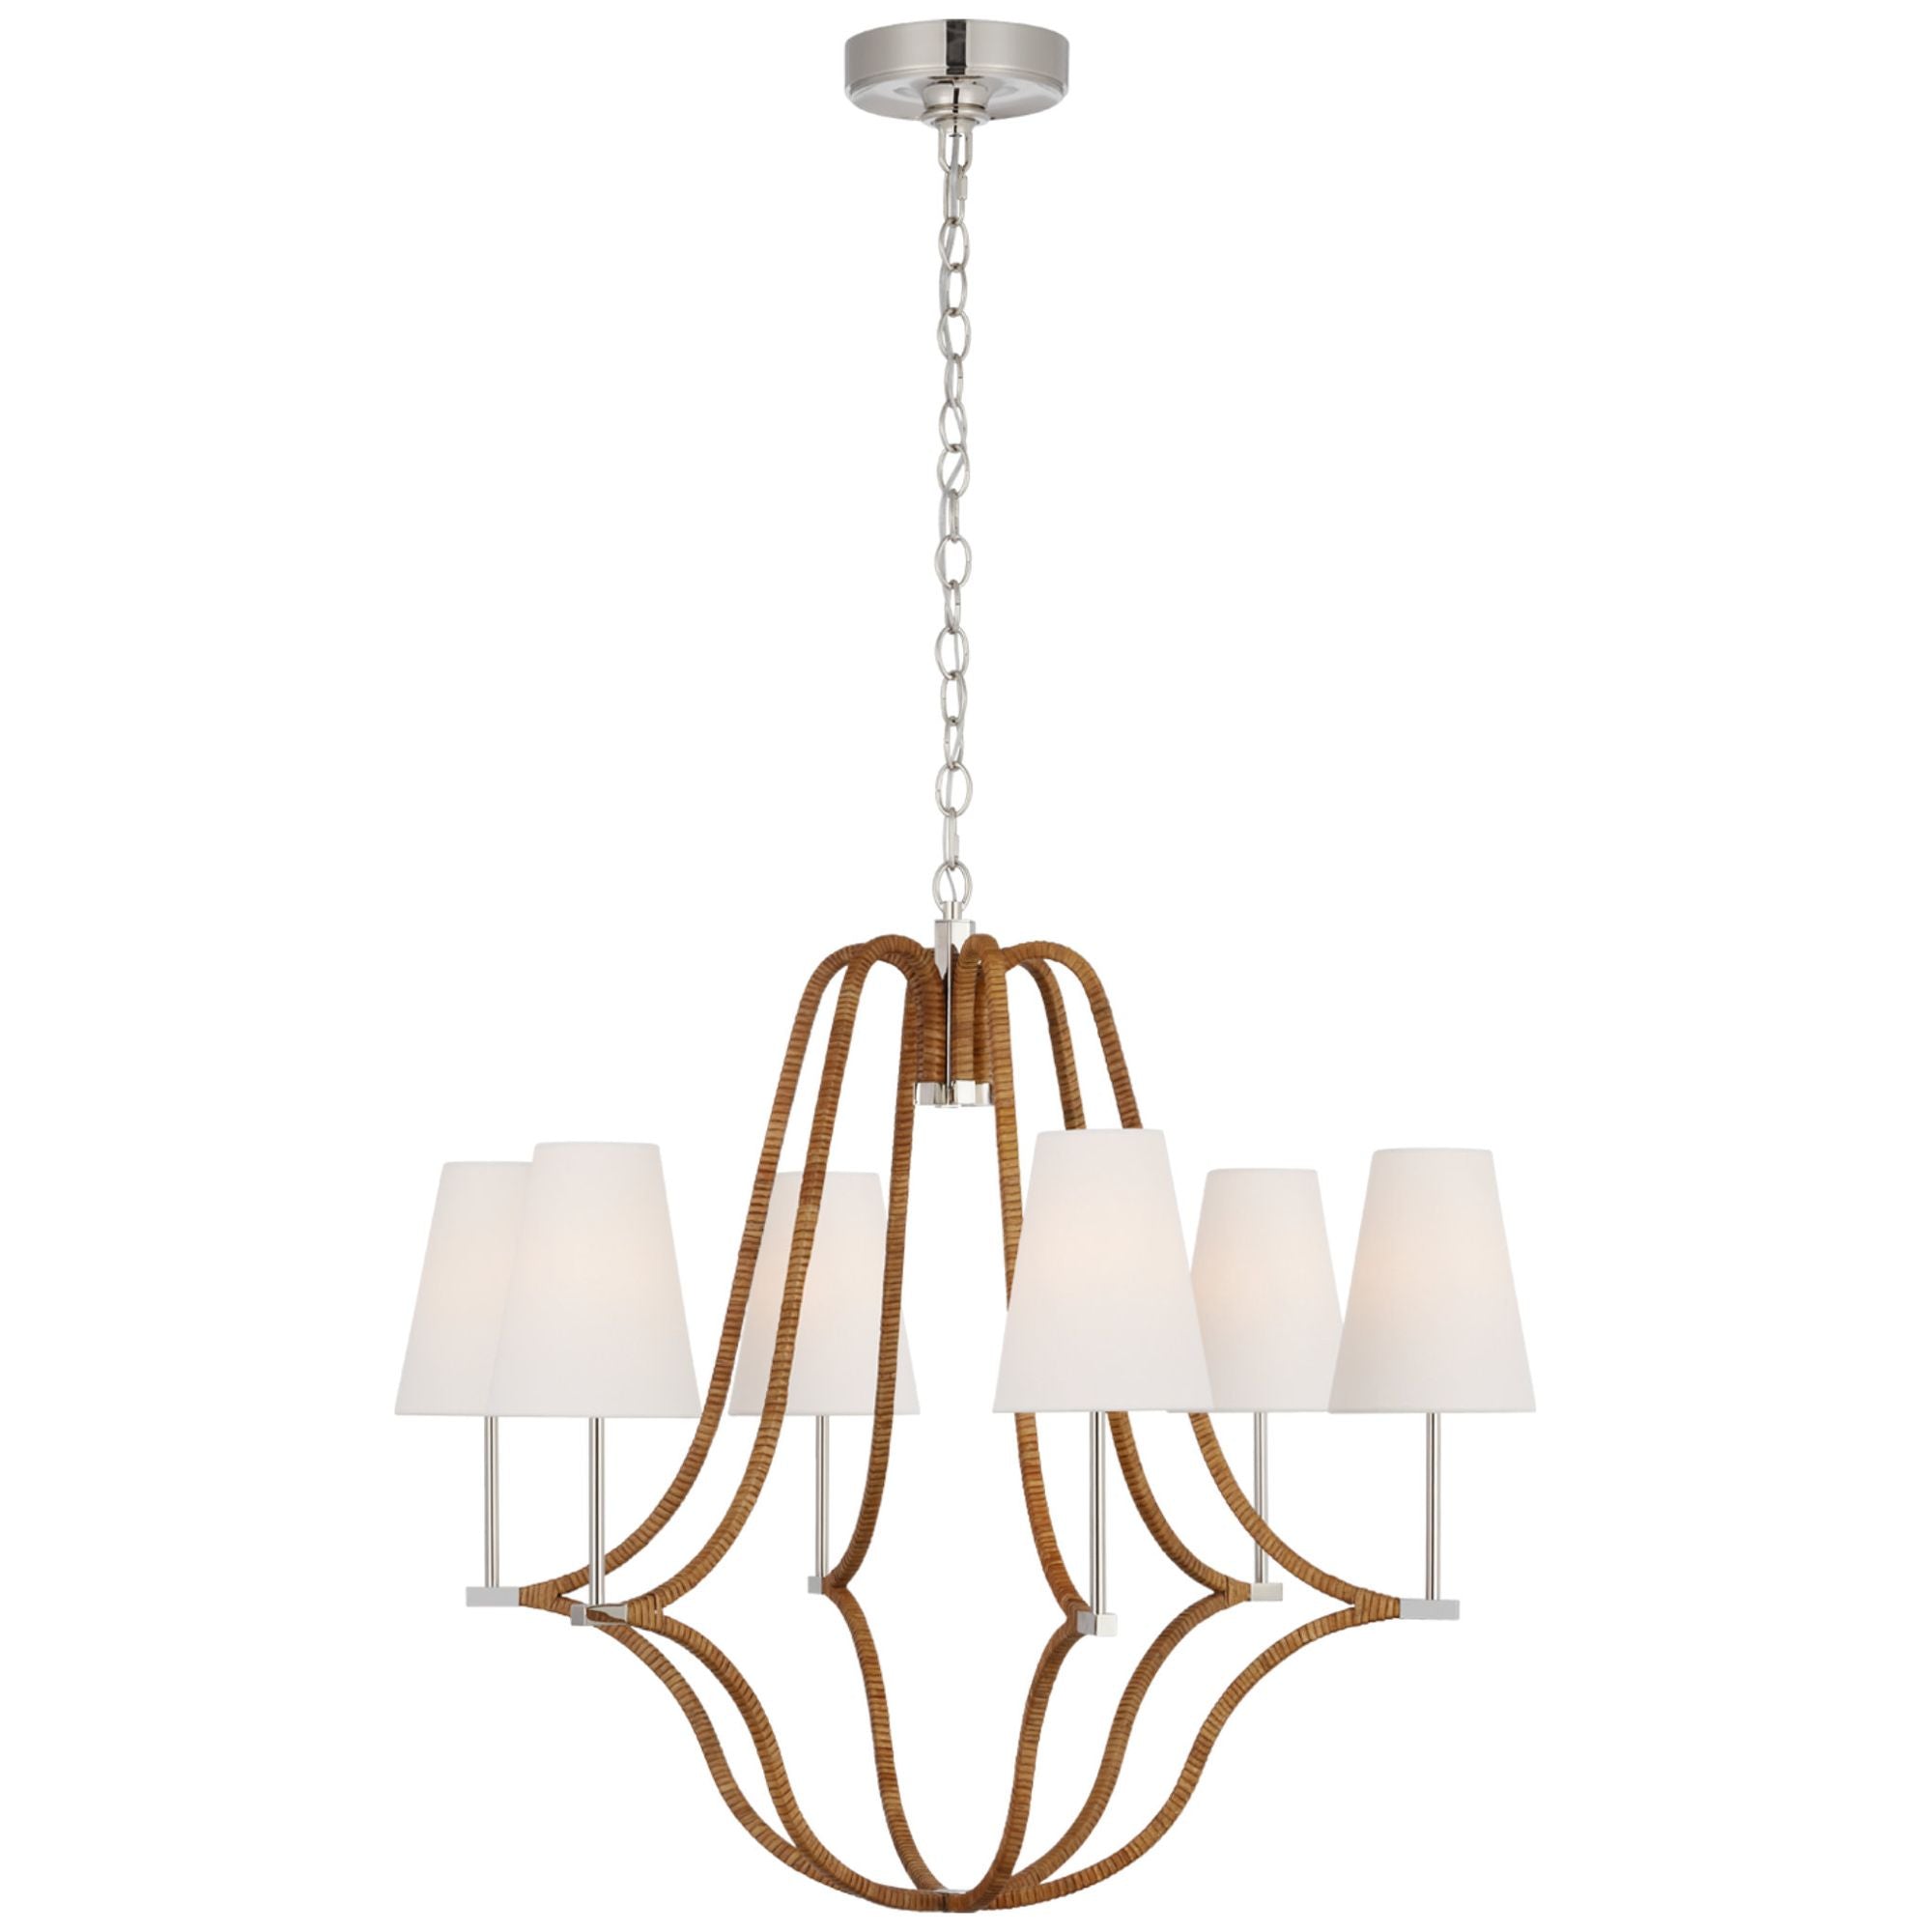 Chapman & Myers Biscayne Large Wrapped Chandelier in Polished Nickel and Natural Rattan with Linen Shades